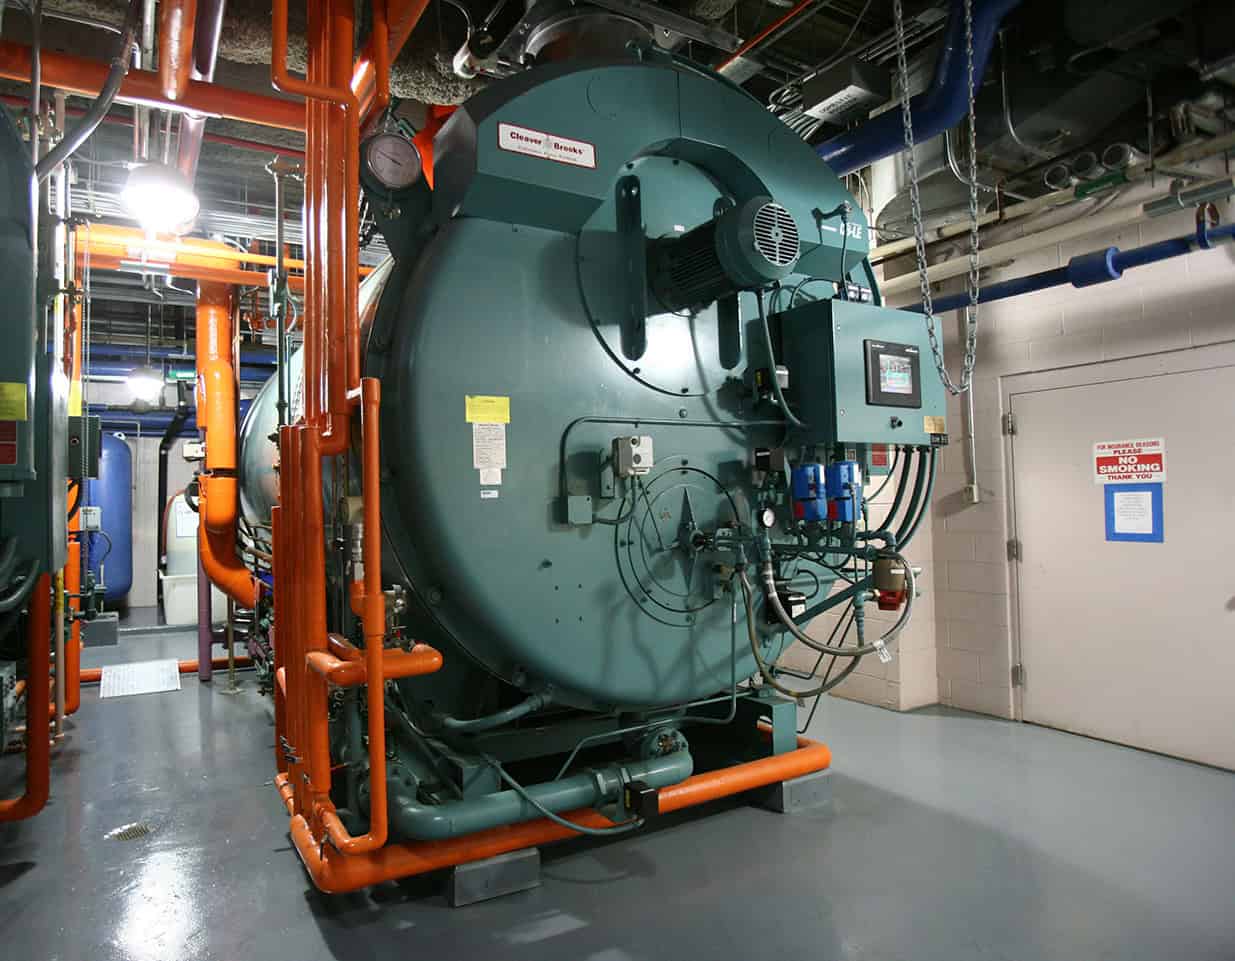 A large commercial boiler system in the boiler room of a facility.